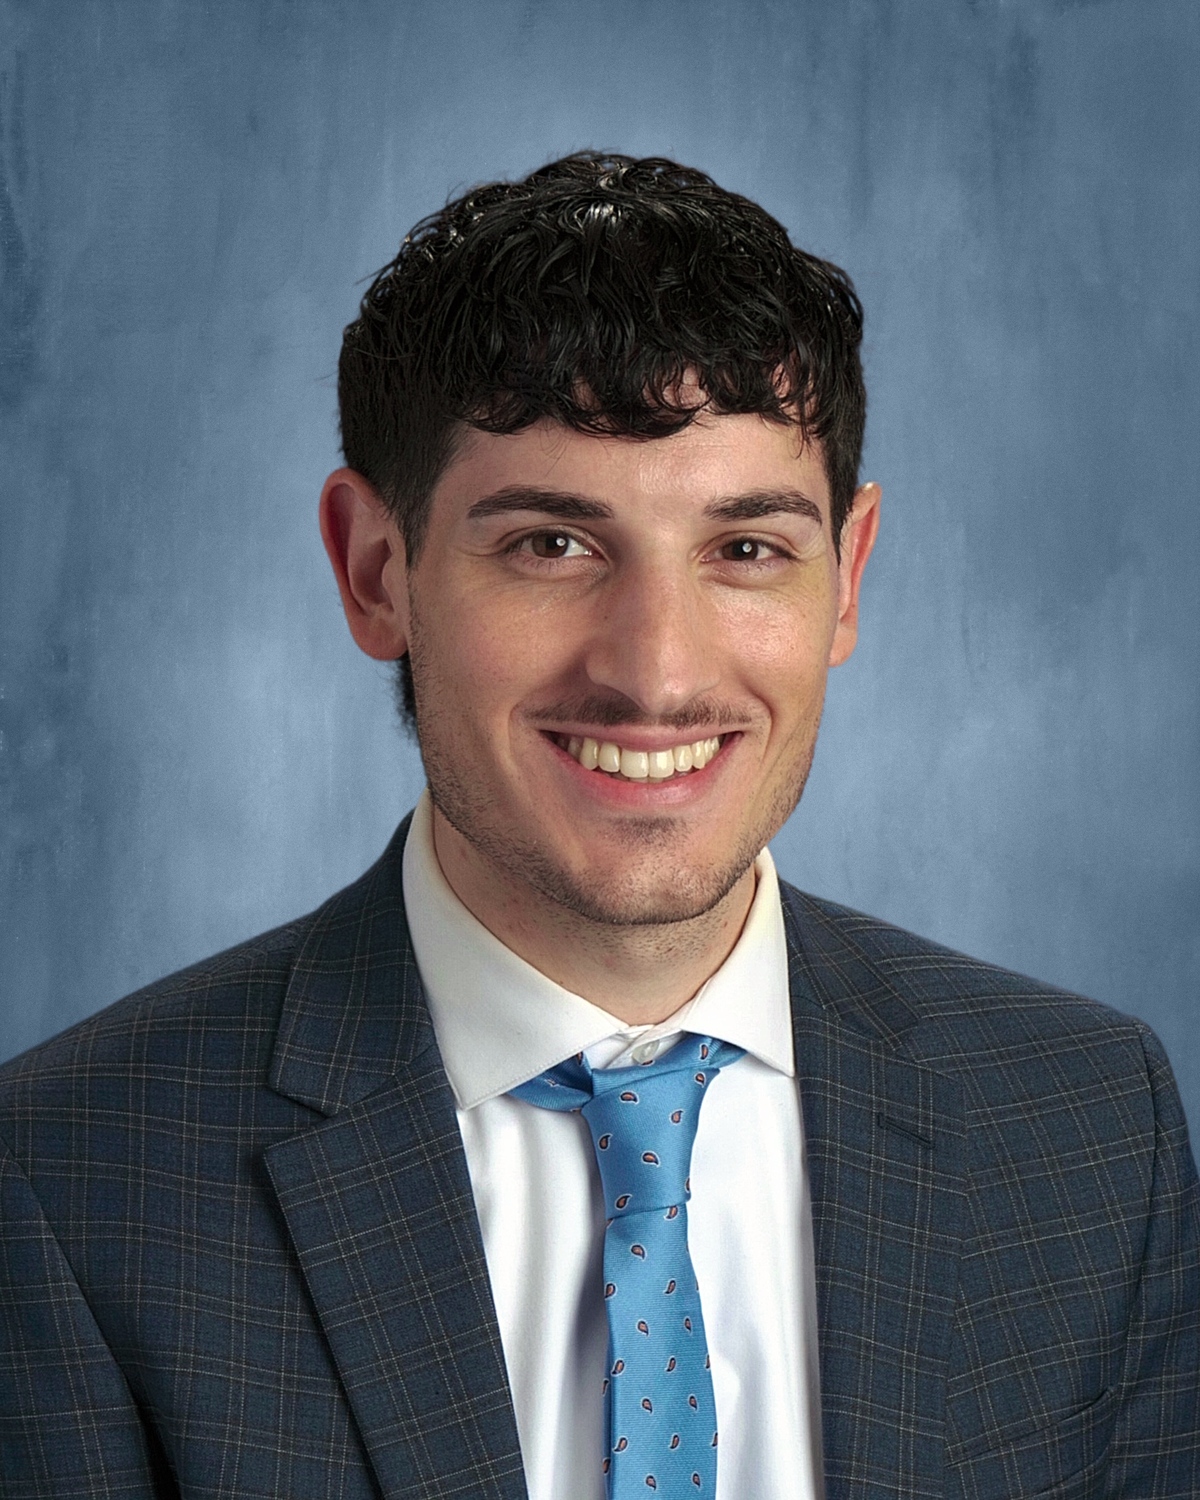 Photo of man wearing suit with light blue tie, against a blue background